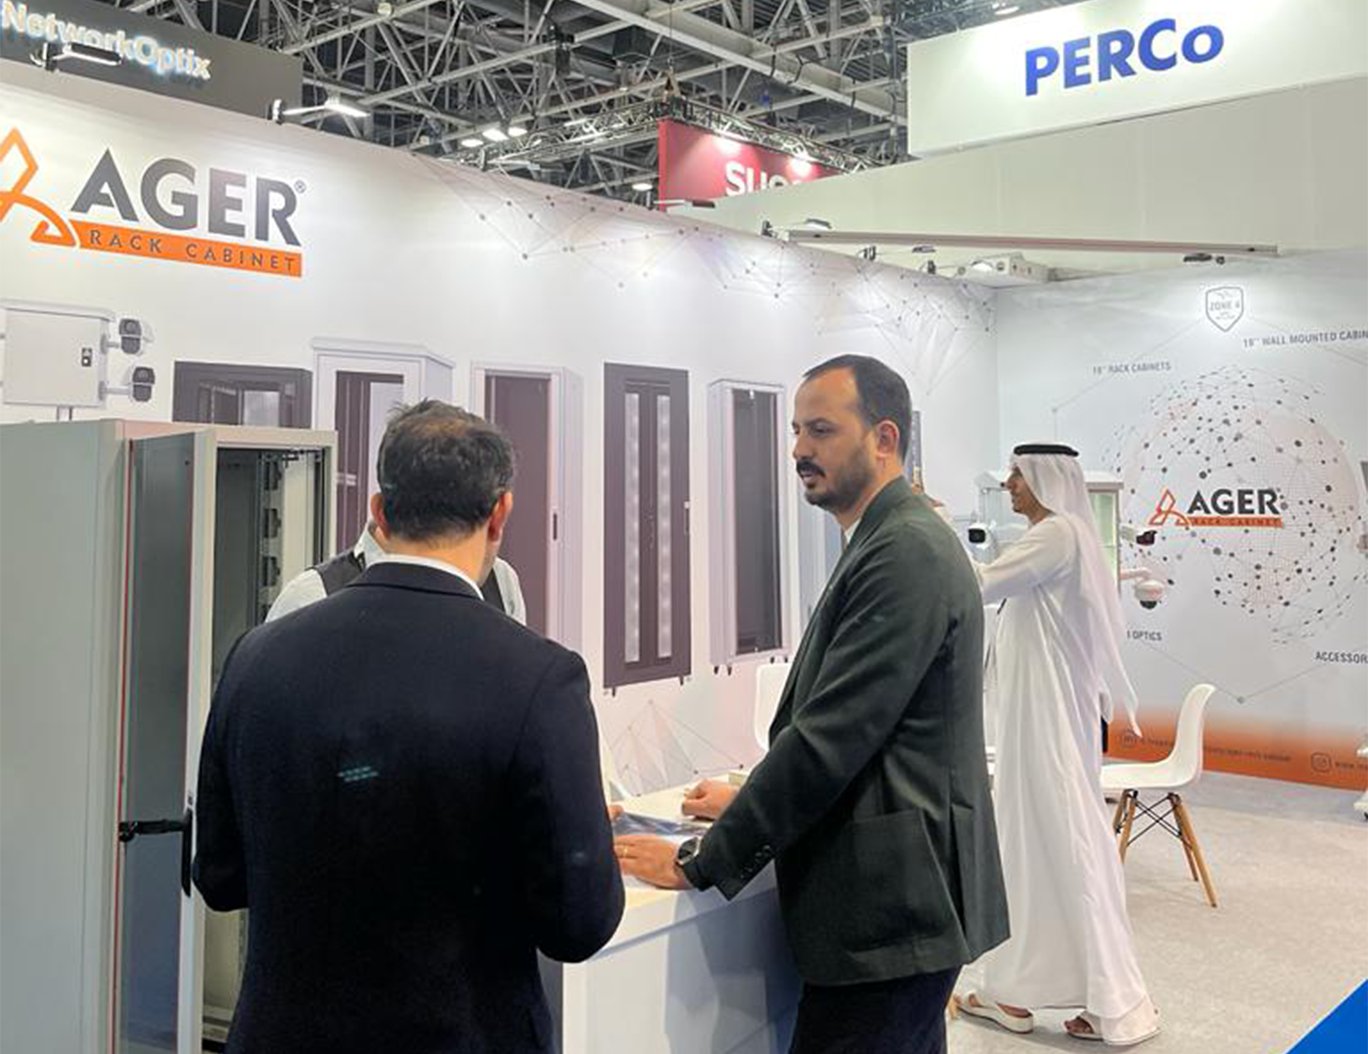 INTERSEC Technology and Security Exhibition took place in DUBAI between January 16-18.